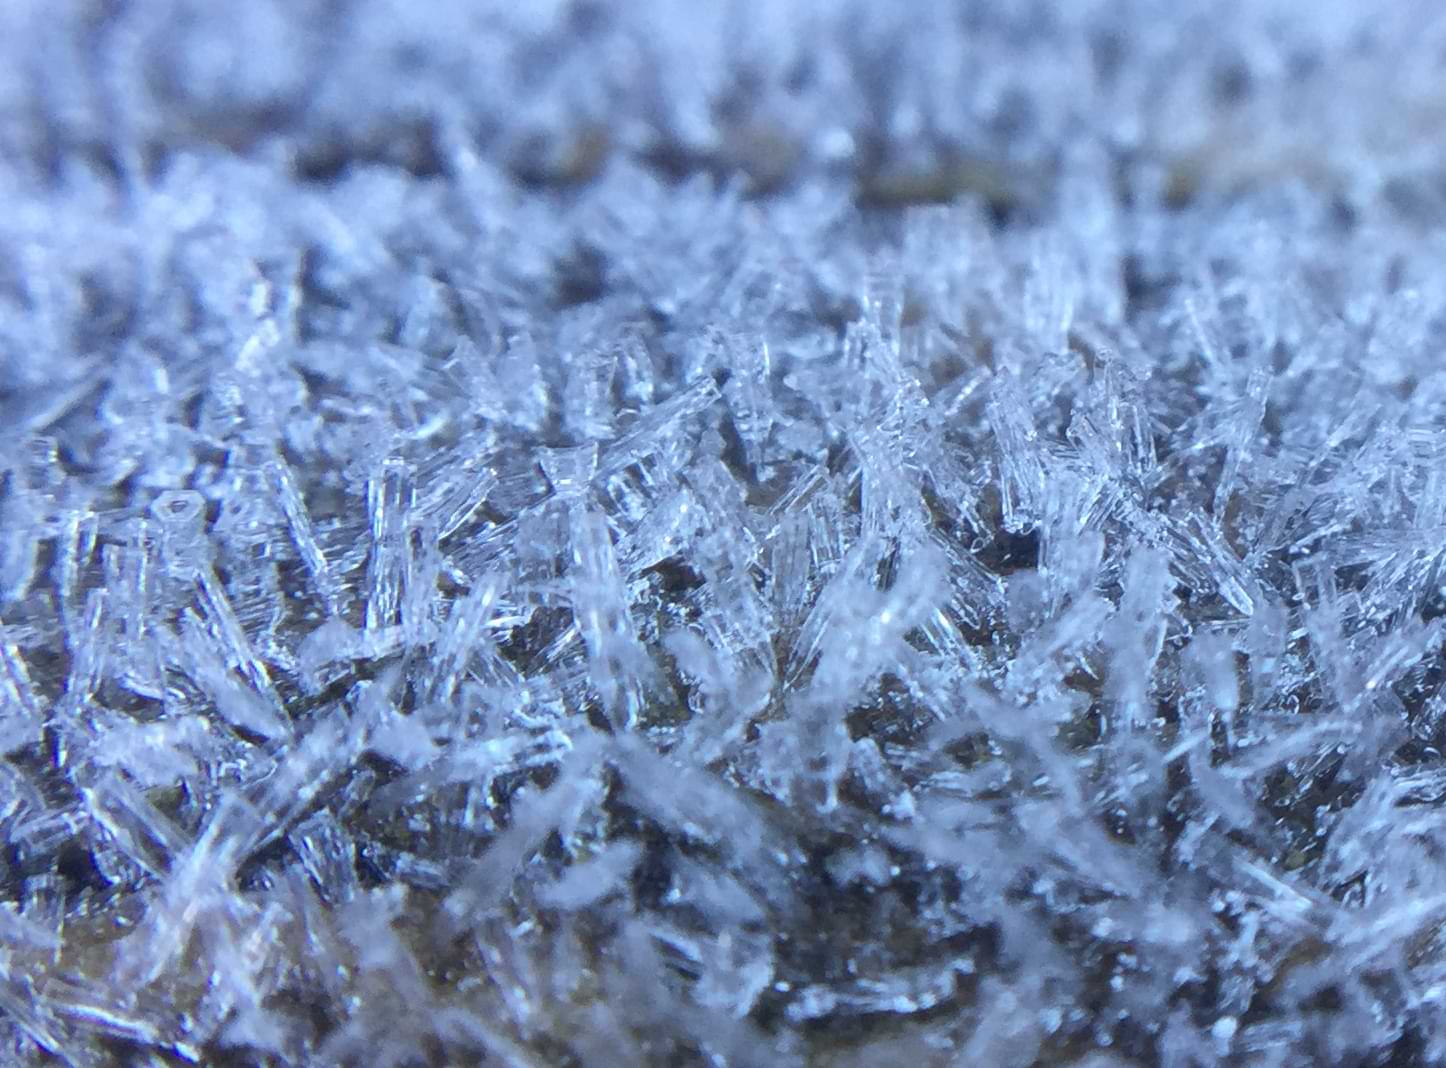 A second photo of ice crystals.